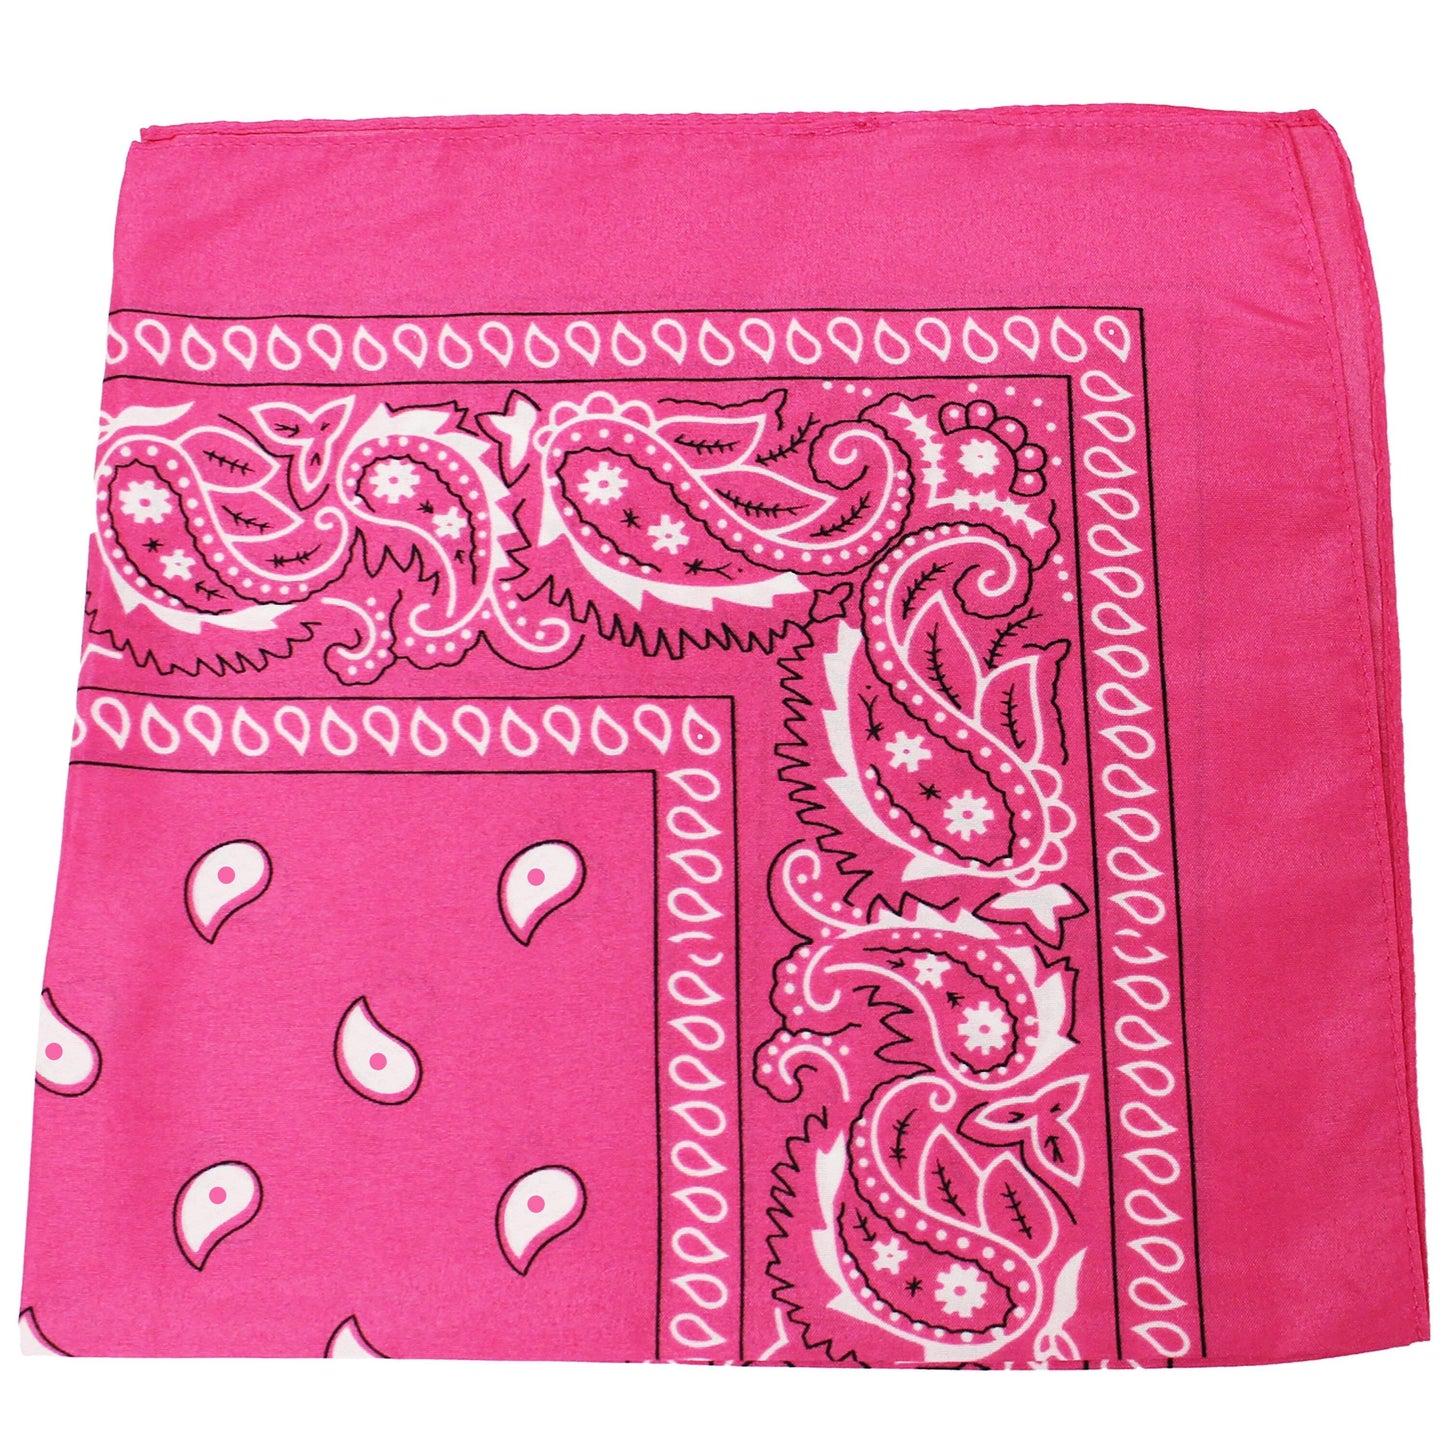 Pack of 30 Polyester 22 x 22 Inch Paisley Printed Bandanas